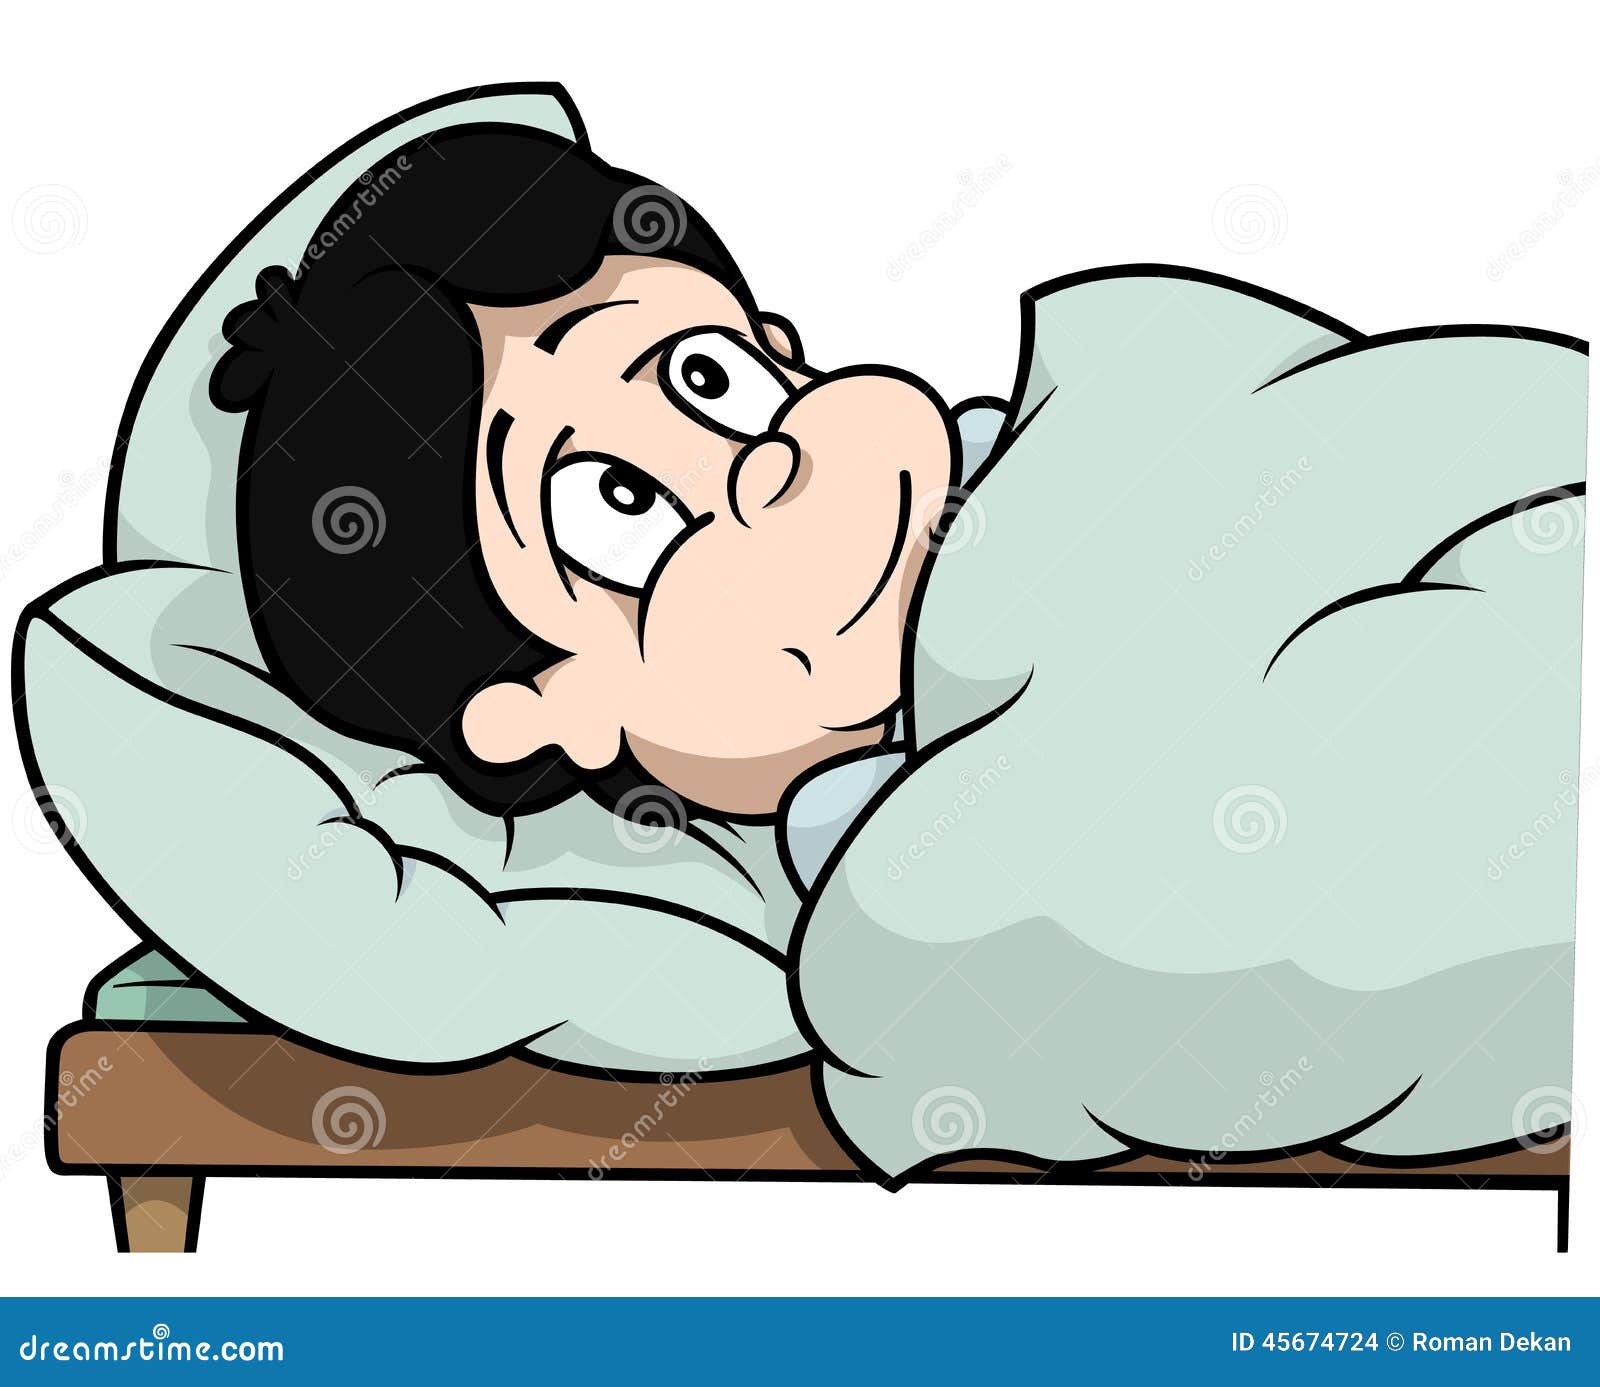 Boy Laying In Bed Stock Vector - Image: 45674724